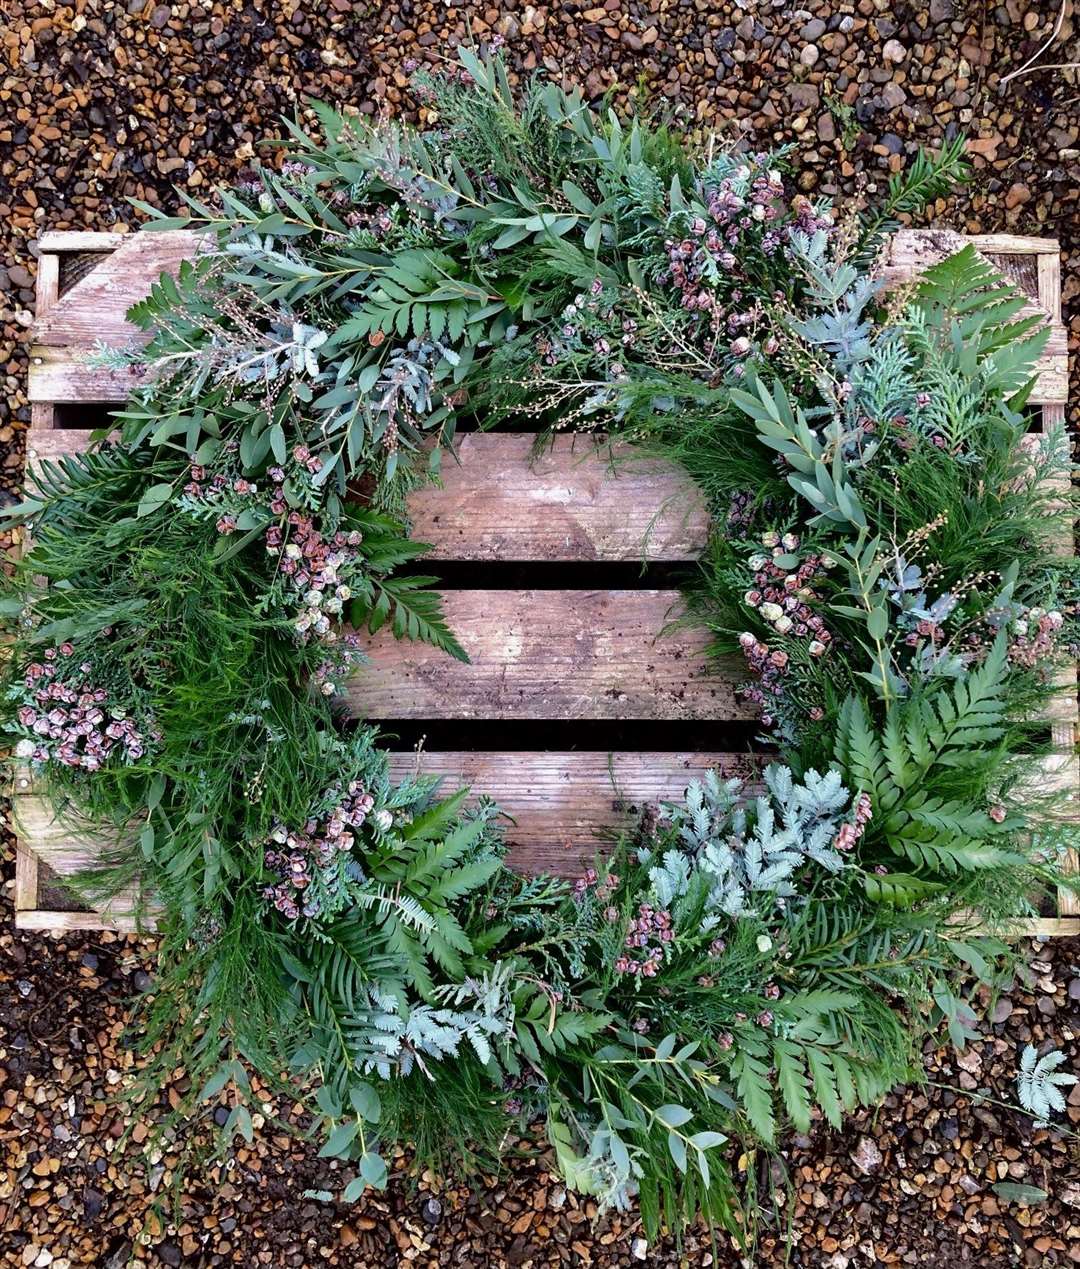 Making your own beautiful, natural wreath is guaranteed to get you in the festive spirit